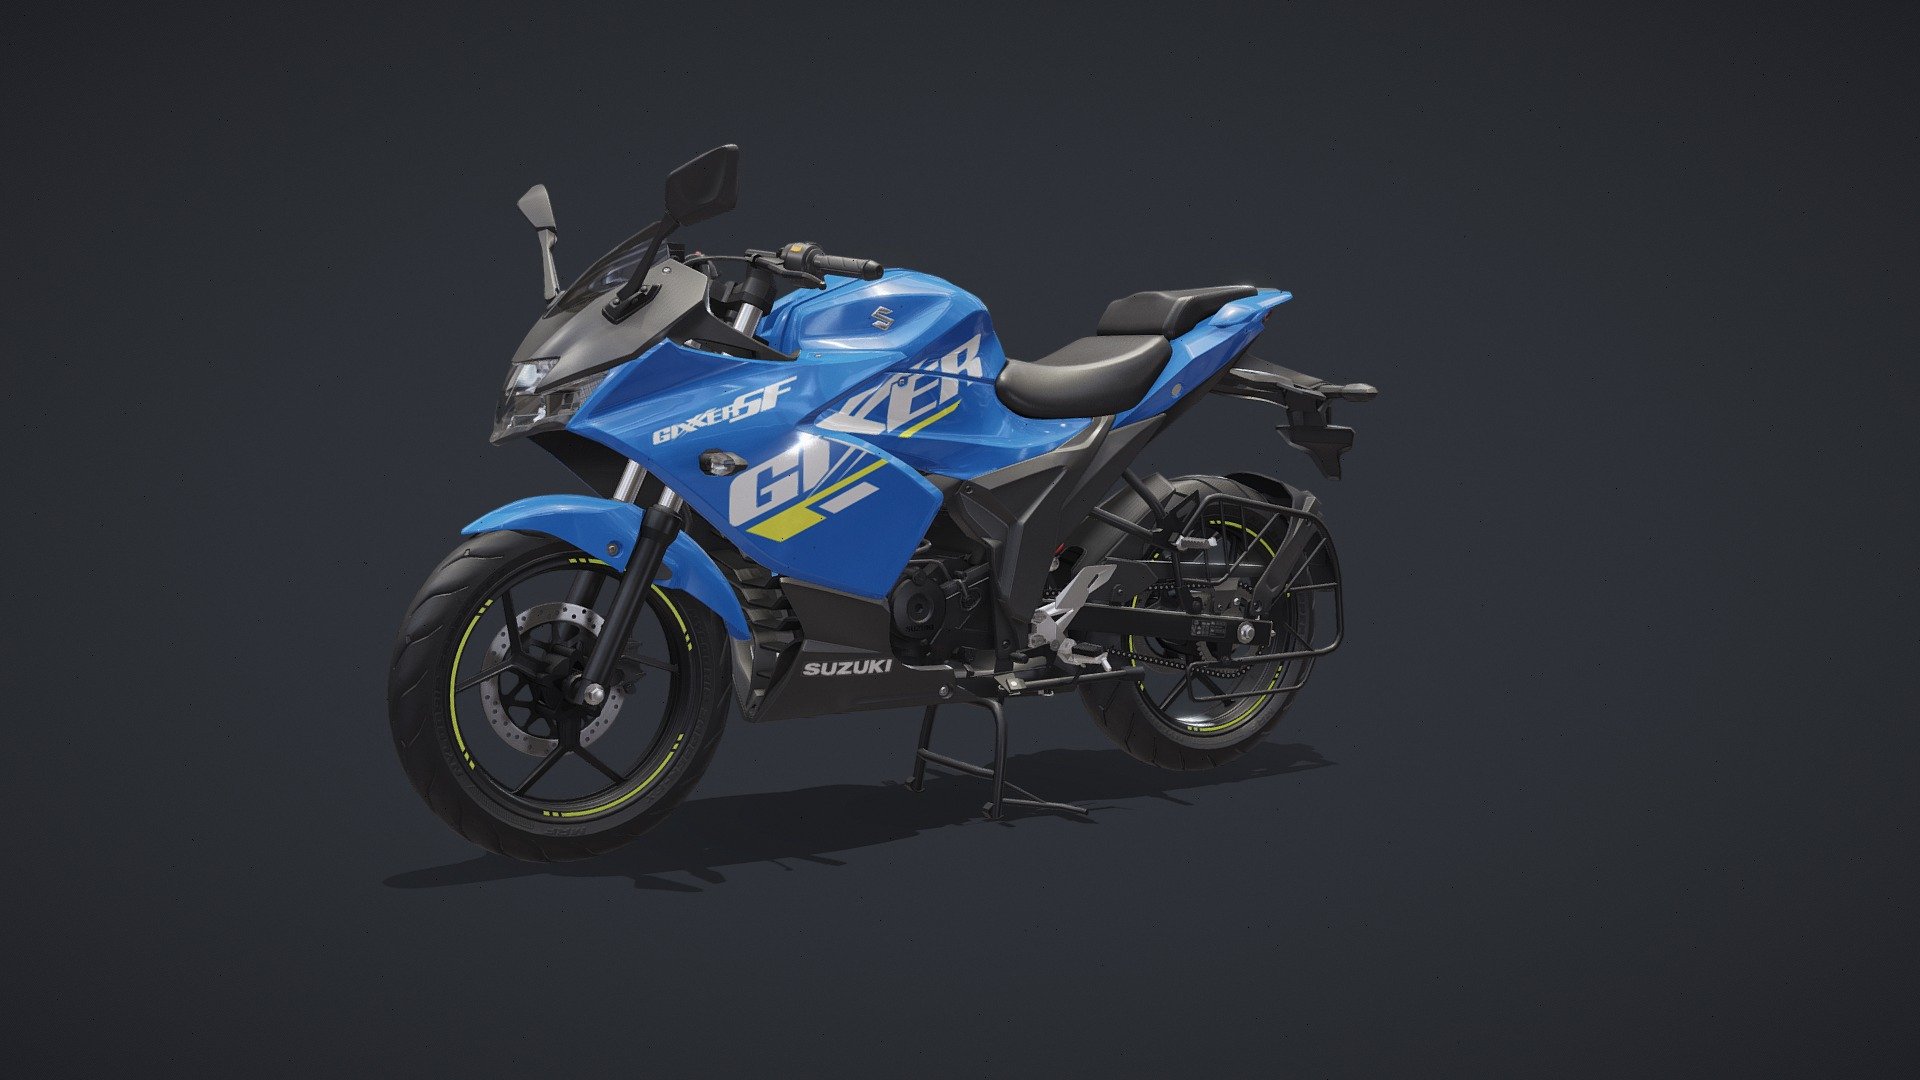 Suzuki Gixxerr Sf realistic, AAA quality model. Modelled in 3ds max and Rendered in marmoset Toolbag. Highly optimized for use on any platform

You may also like: https://sketchfab.com/3d-models/new-gixxer-abs-2022-0b0e7e51343e4f3cb5a2945eeeadb53b

To learn more about products &amp; services go to:
Website: http://www.dreamerzlab.com
Like, Subscribe &amp; Follow:
Facebook: https://www.facebook.com/dreamerzlab
YouTube: https://www.youtube.com/channel/UCBxy&hellip;
Linkedin: https://www.linkedin.com/company/drea&hellip;
Twitter: https://twitter.com/dreamerz_lab
Instagram: https://www.instagram.com/dreamerzlabltd
Email: info@dreamerzlab.com 
Call: +8801675110479 - New Gixxer SF 2022 - 3D model by Dreamerz Lab (@dreamerzlab) 3d model